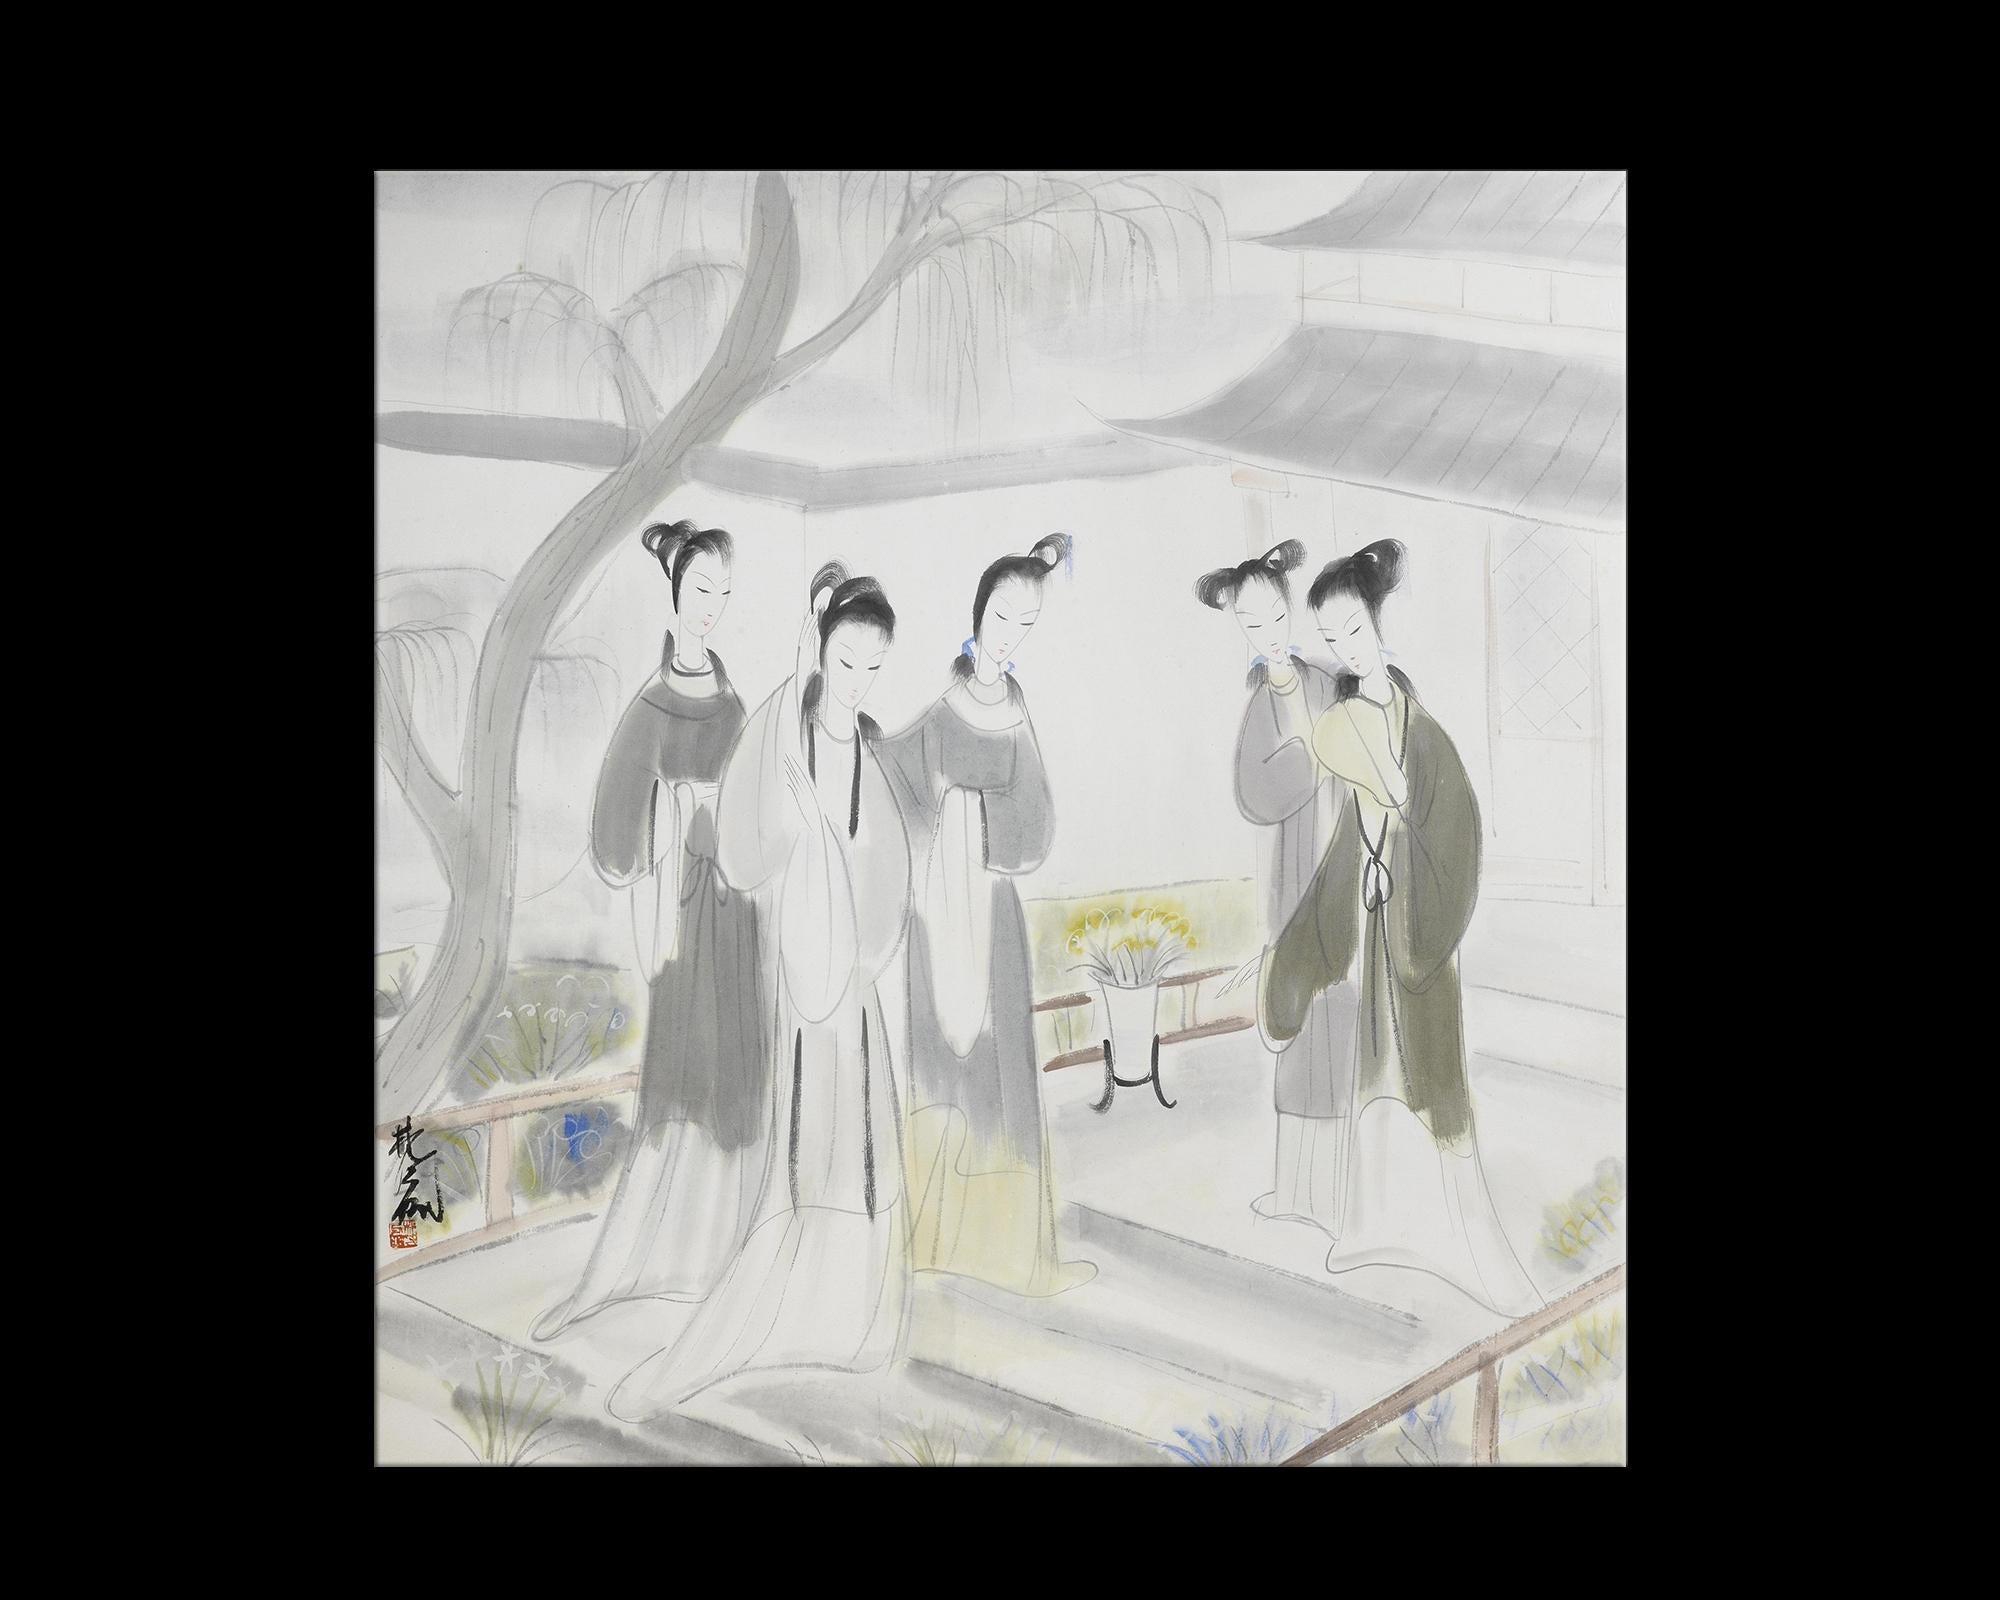 This large Qing Dynasty Revival image is a faithful yet nuanced reproduction titled 